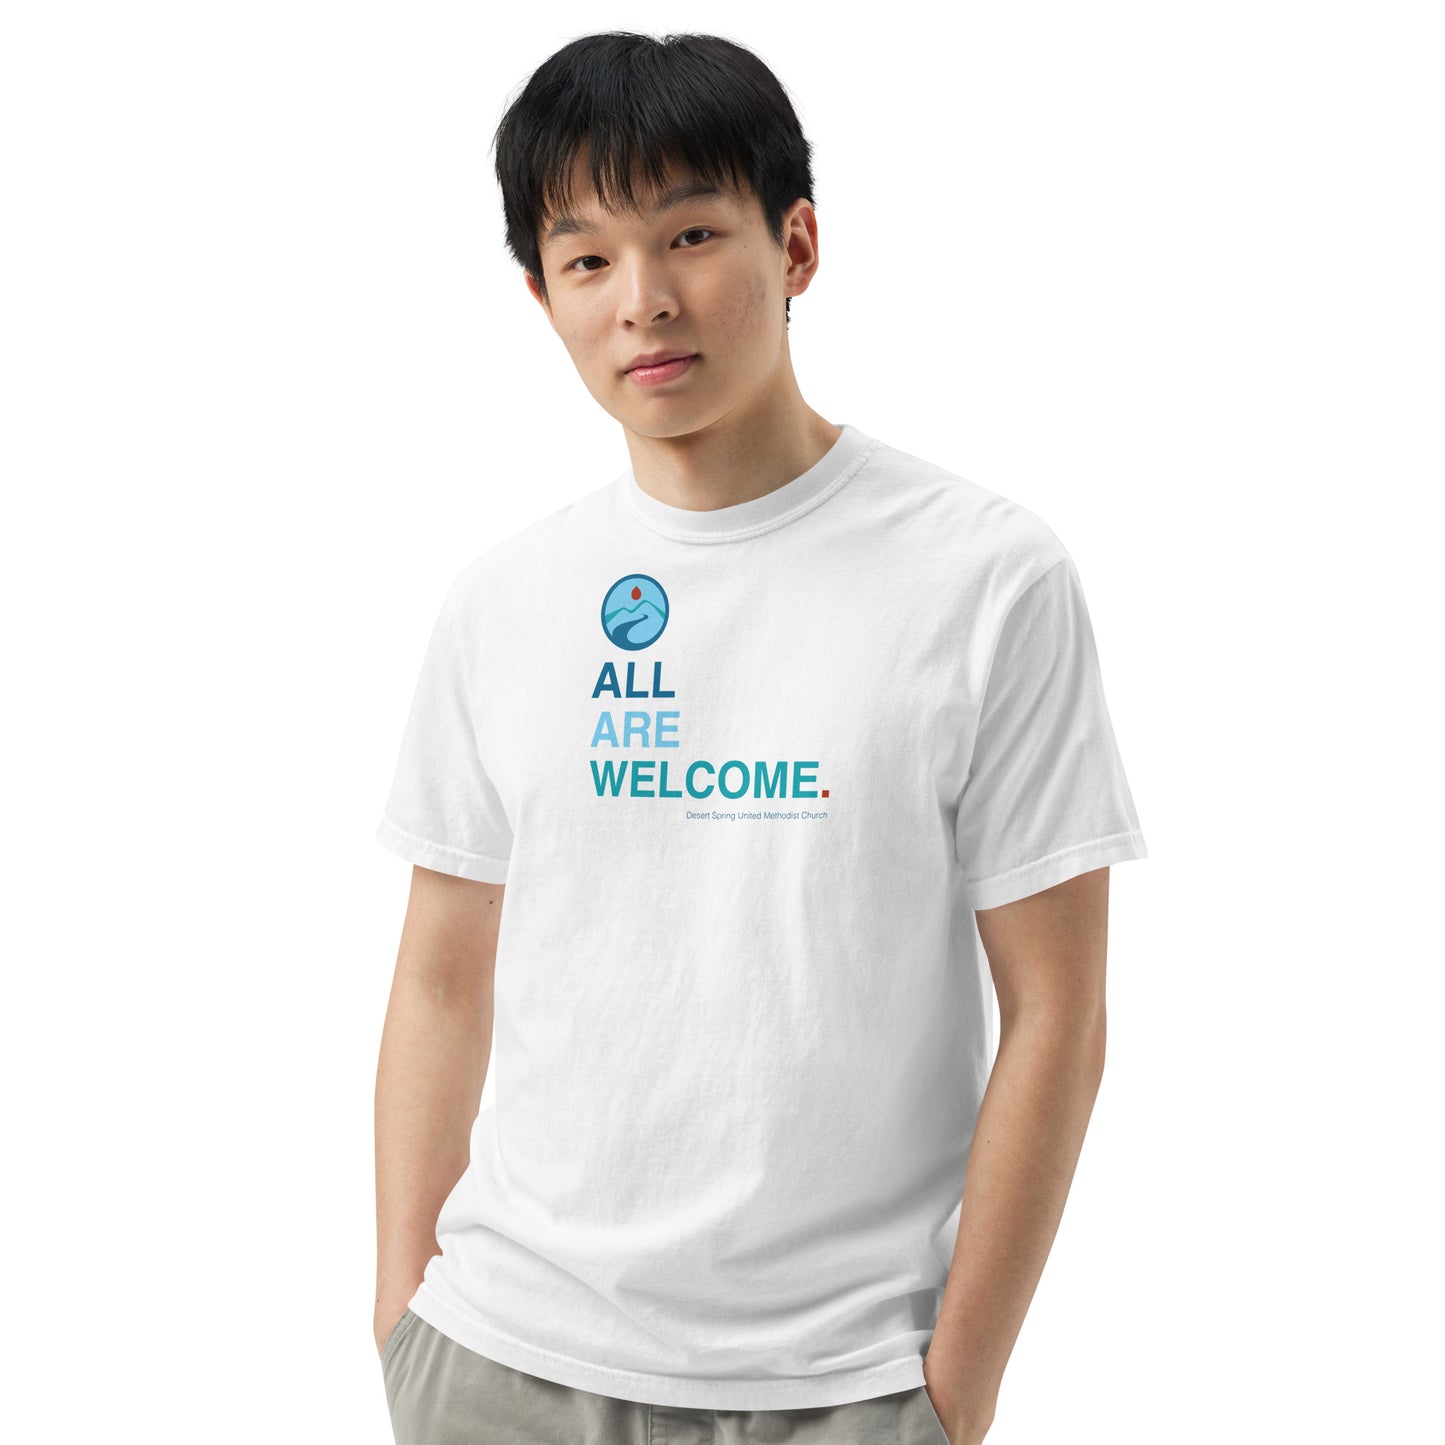 Men’s All Are Welcome t-shirt